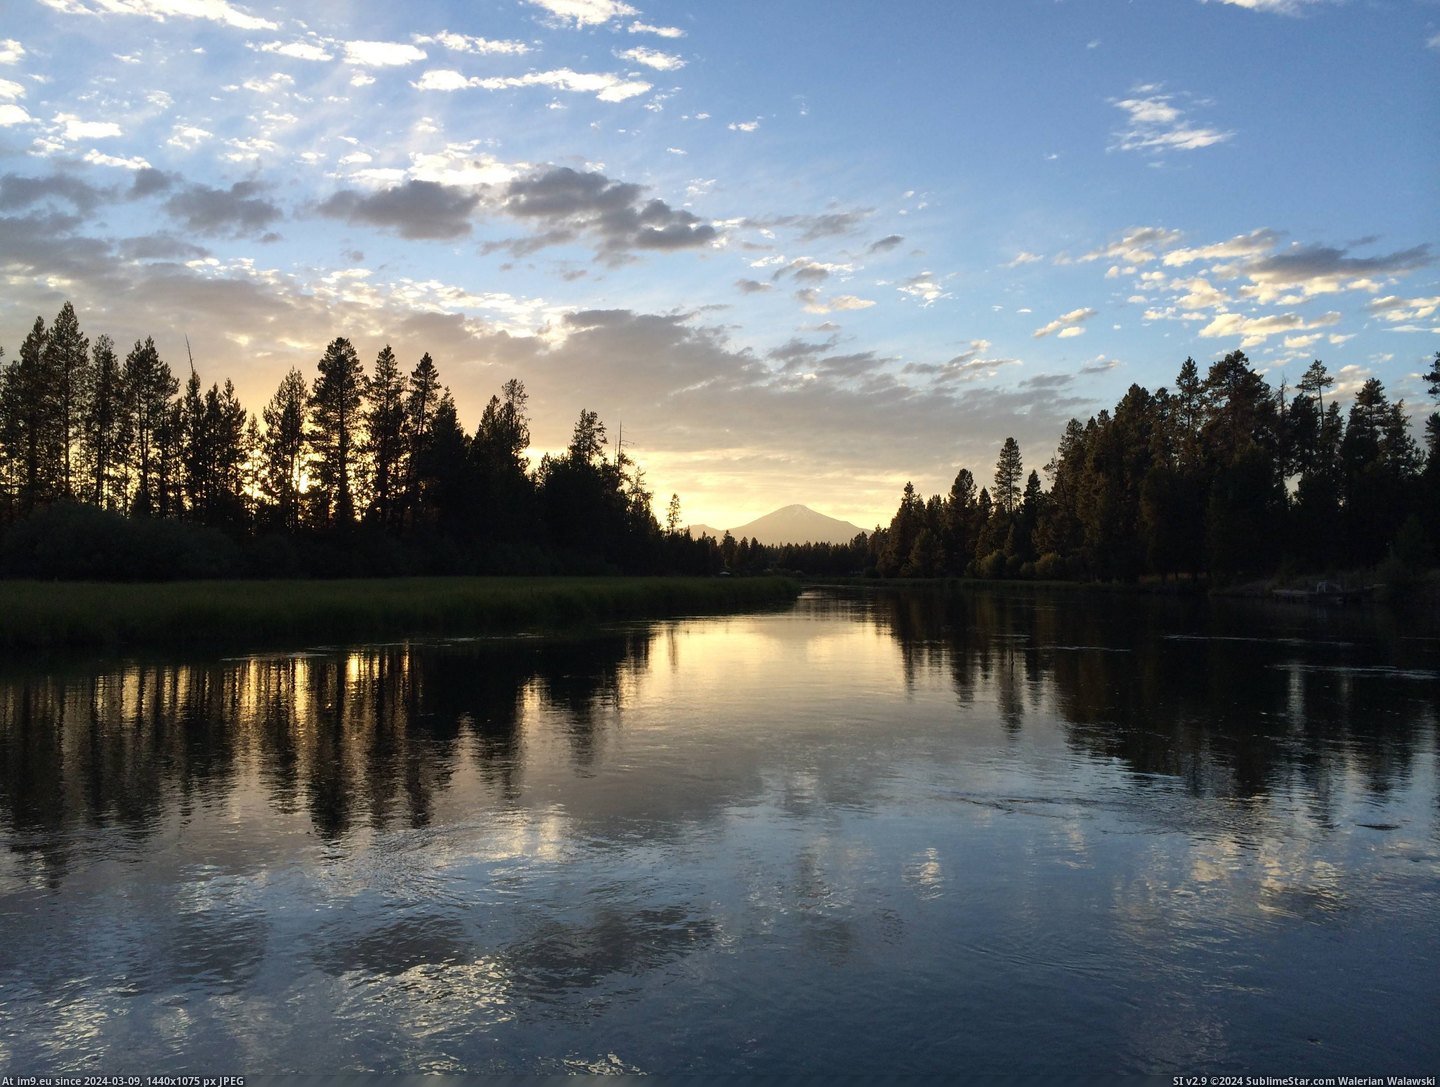 #Pretty #Turned #Fishing #Nicely #Iphone #Bachelor [Earthporn] Went fishing and all I had to take pictures was my iPhone.. Still turned out pretty nicely! View of Mt Bachelor from Pic. (Изображение из альбом My r/EARTHPORN favs))